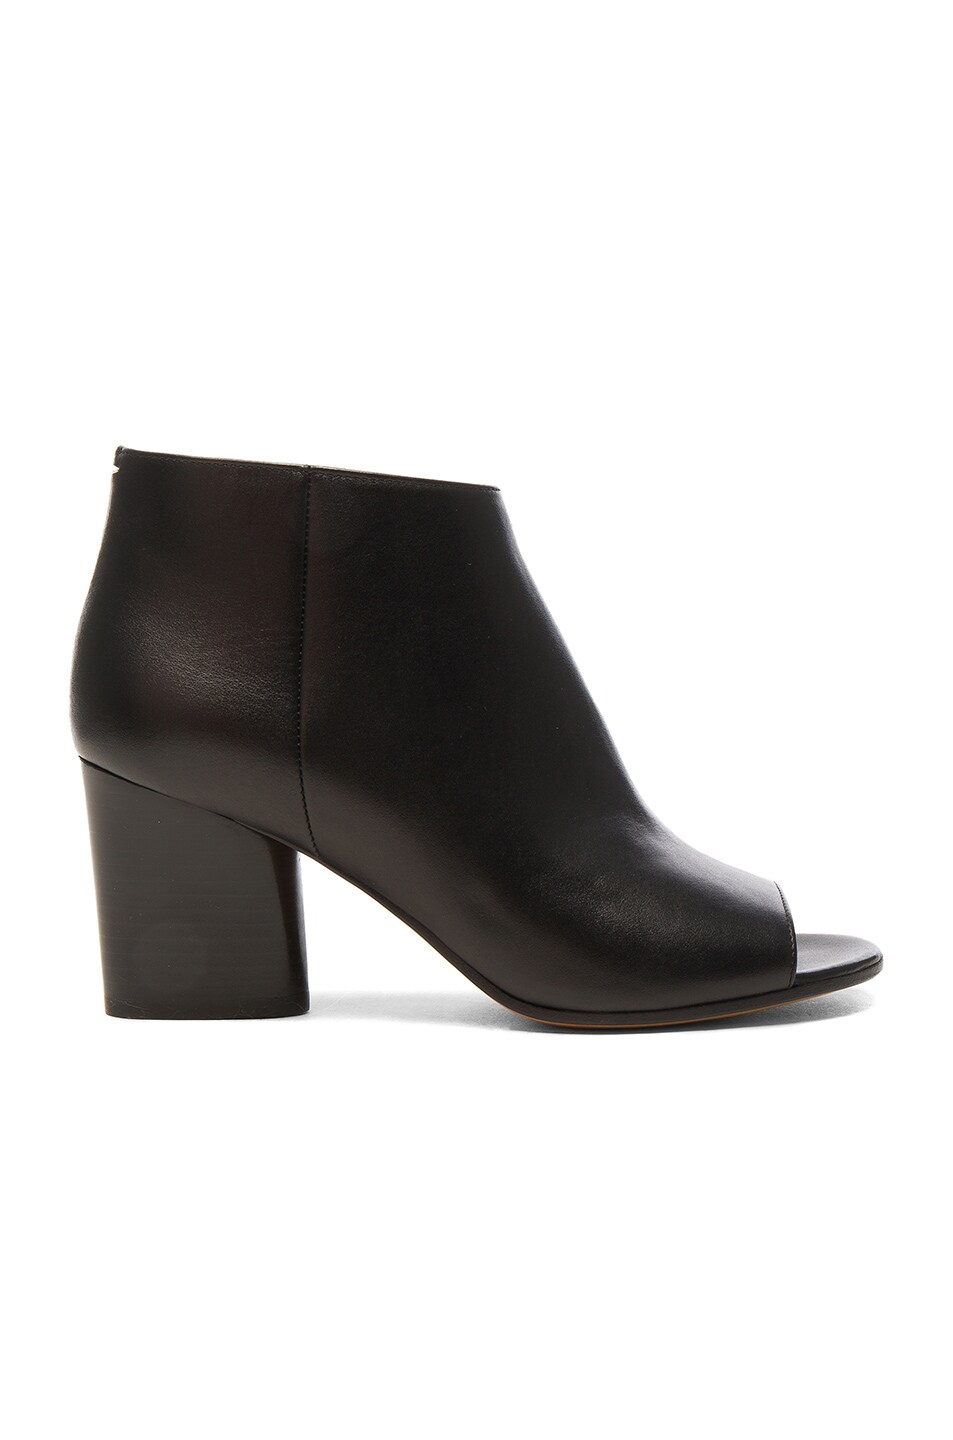 Image 1 of Maison Margiela Leather Open Toe Booties in Black